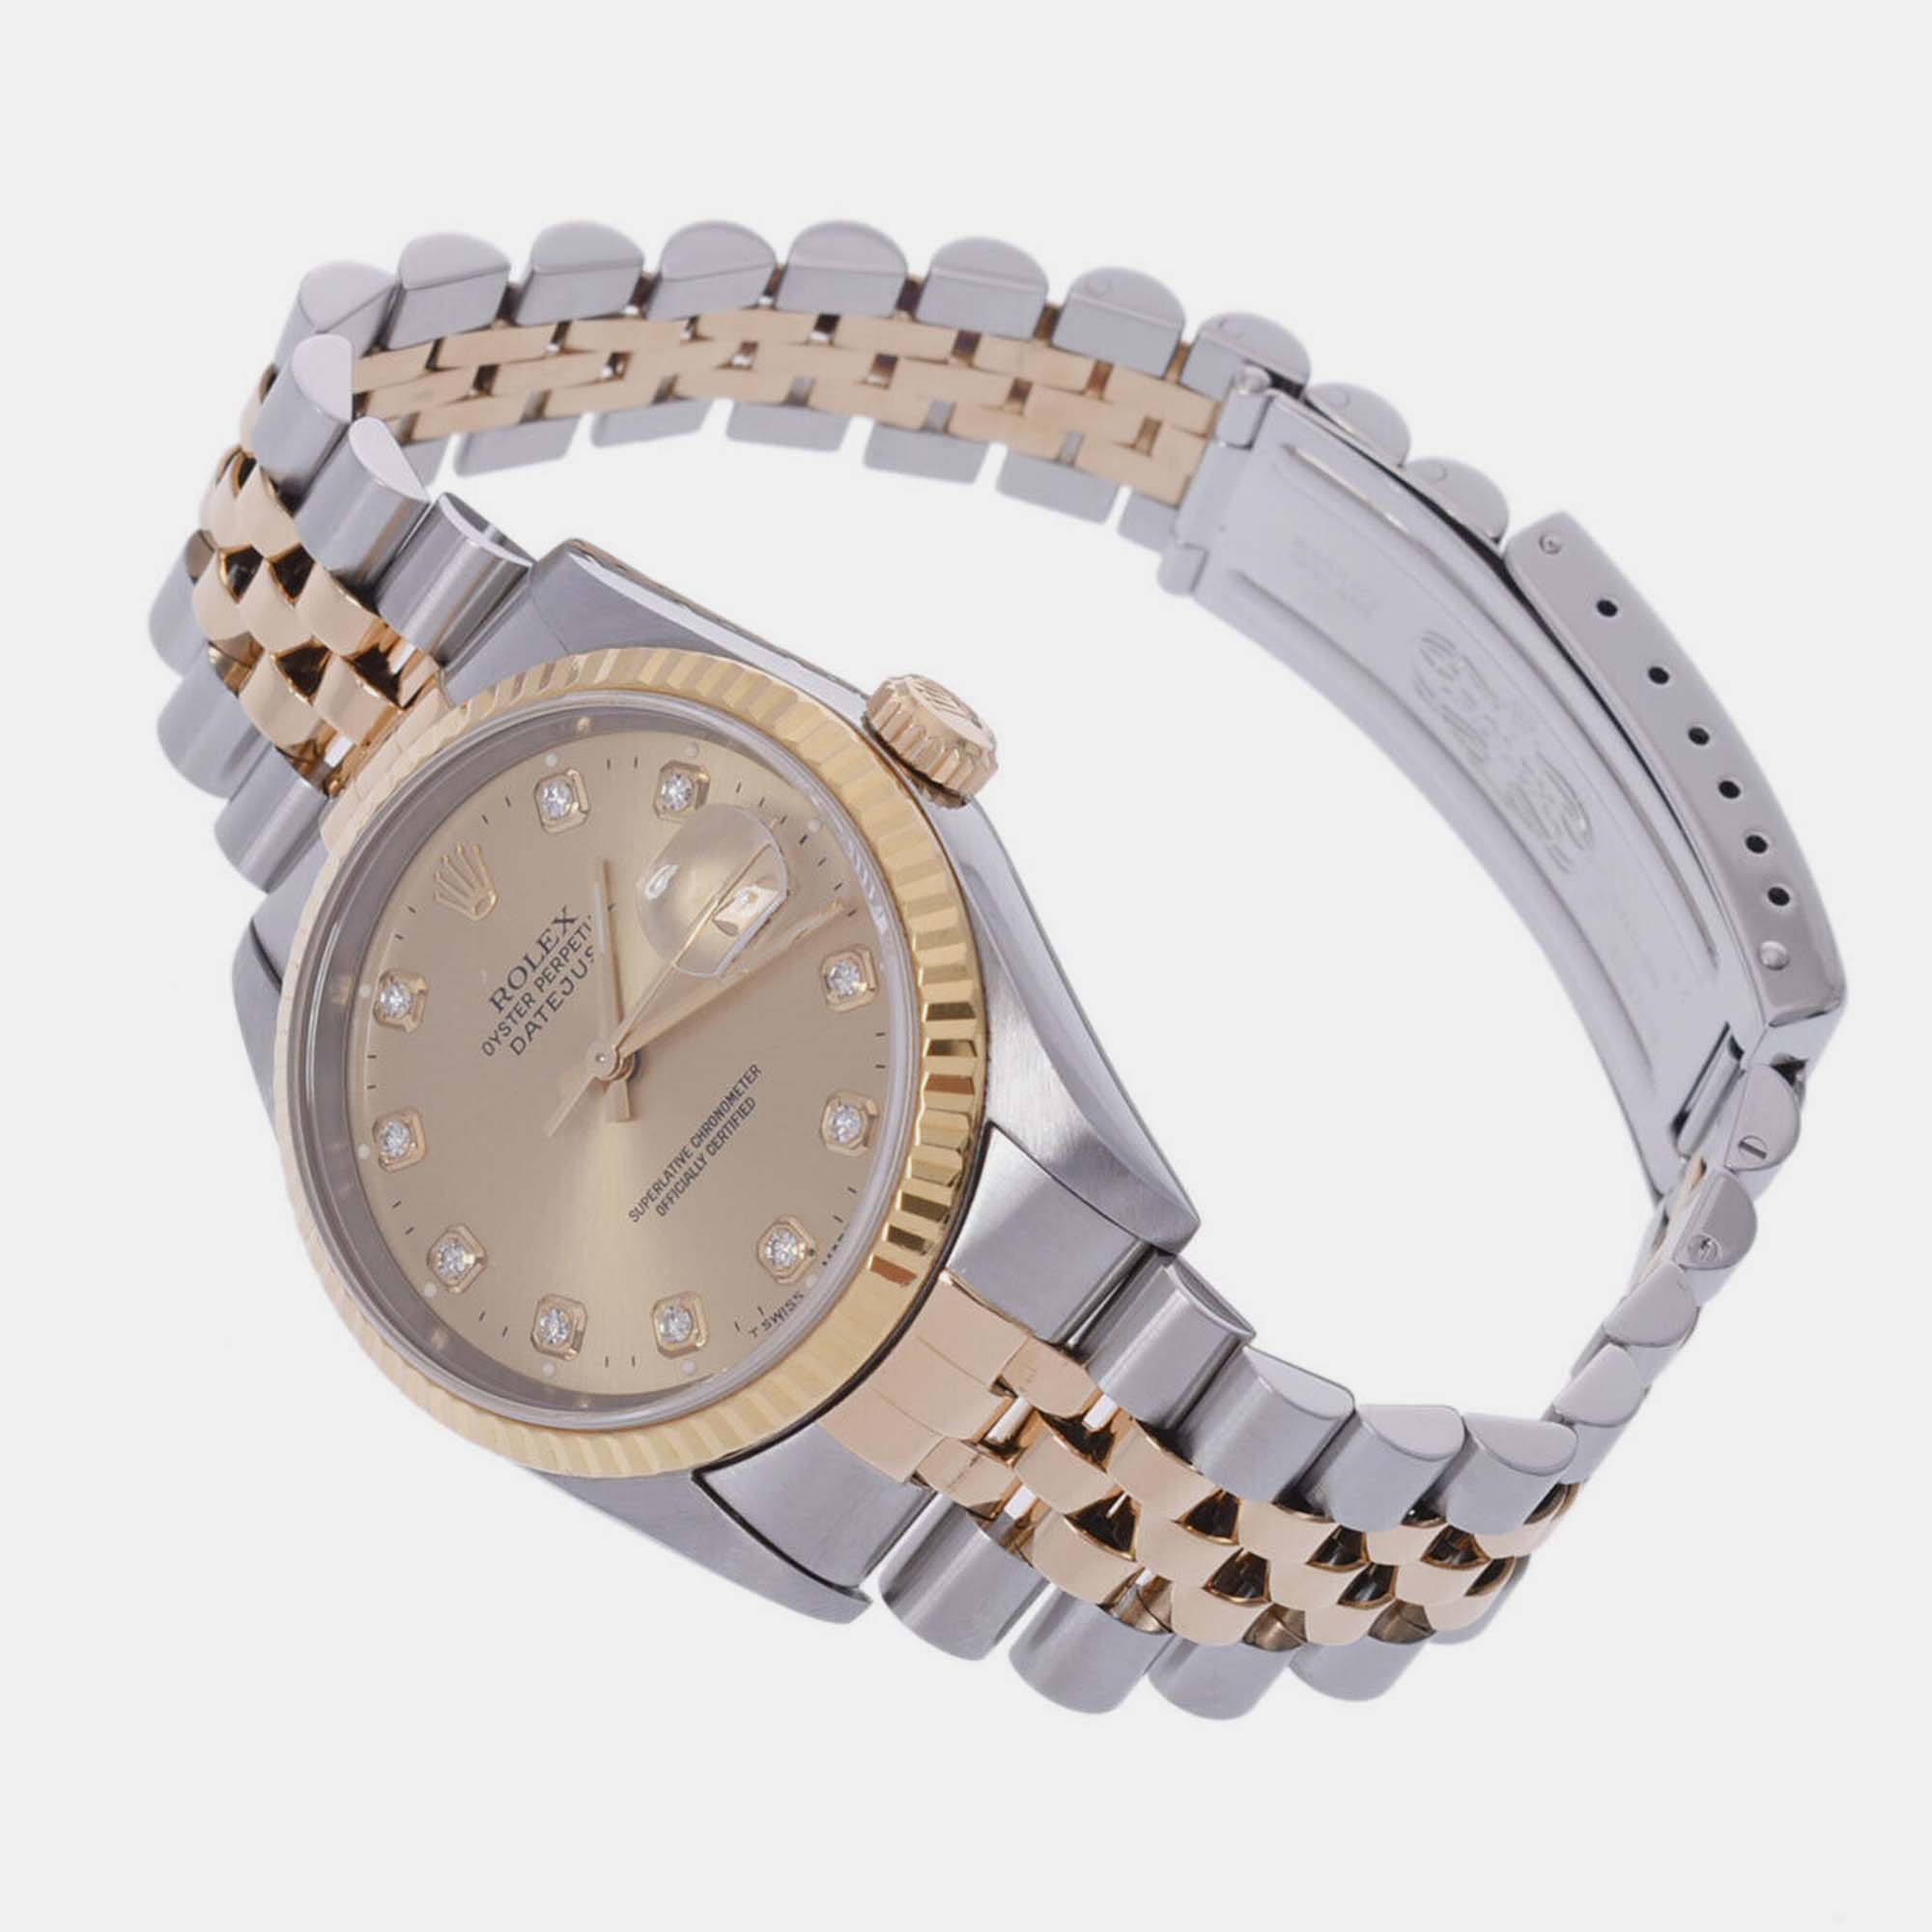 

Rolex Champagne Diamond 18k Yellow Gold And Stainless Steel Datejust 16233 Automatic Men's Wristwatch 36 mm